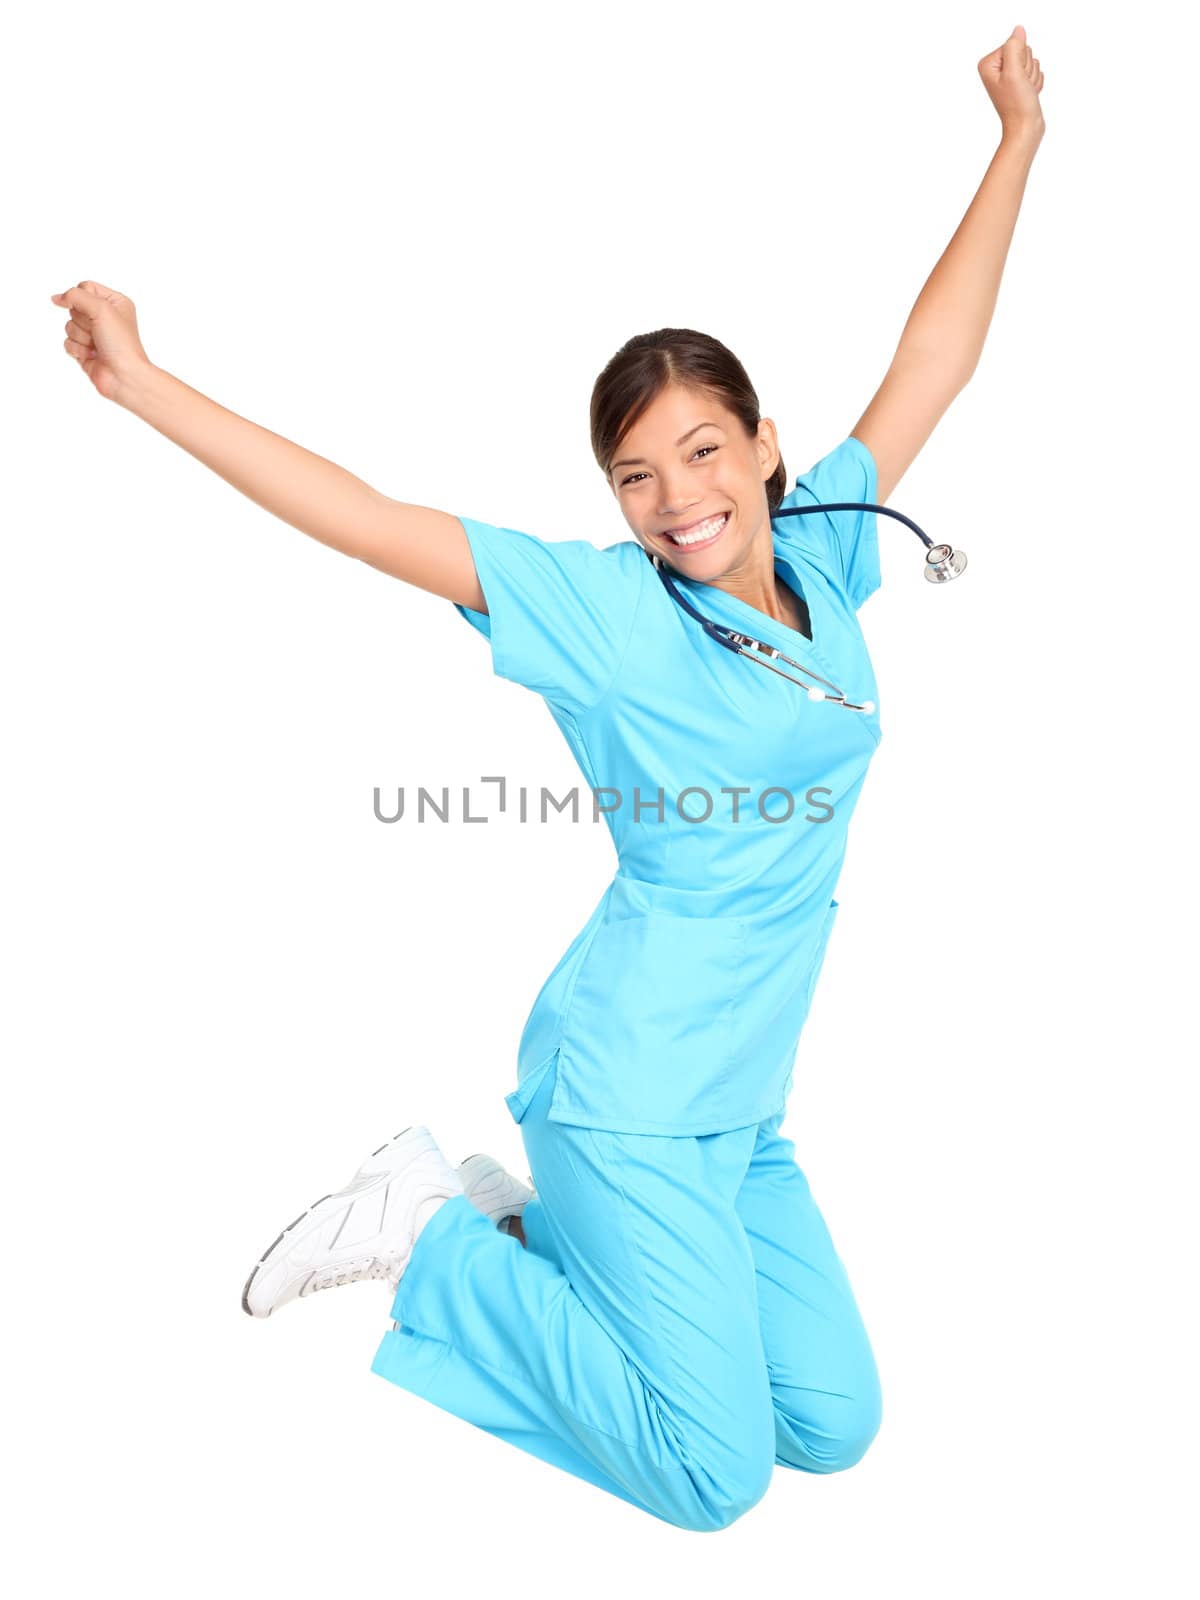 Nurse woman excited, happy and jumping. Female nurse or young medical professional / student jumping of joy. Isolated on white background.